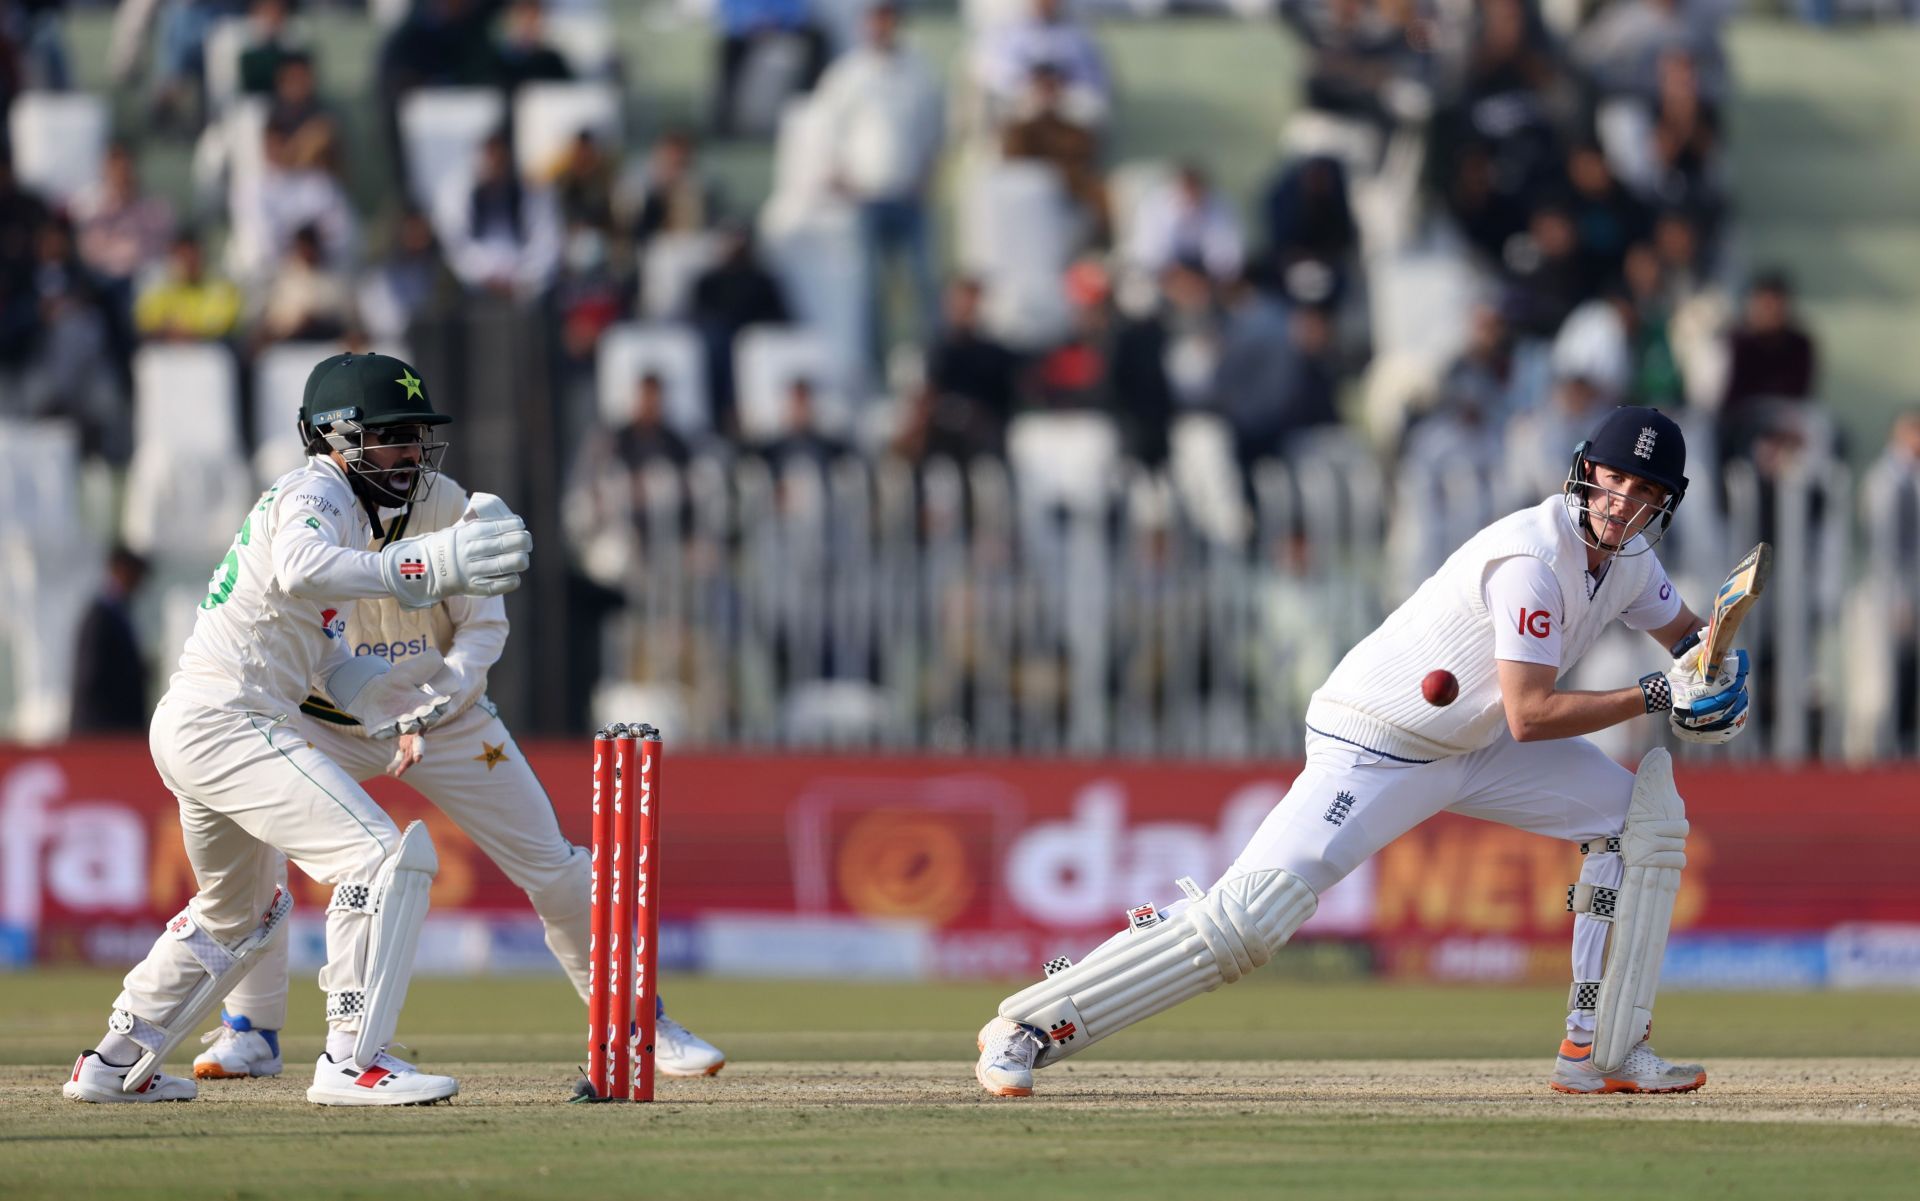 Pakistan v England - First Test Match: Day One (Image: Getty)